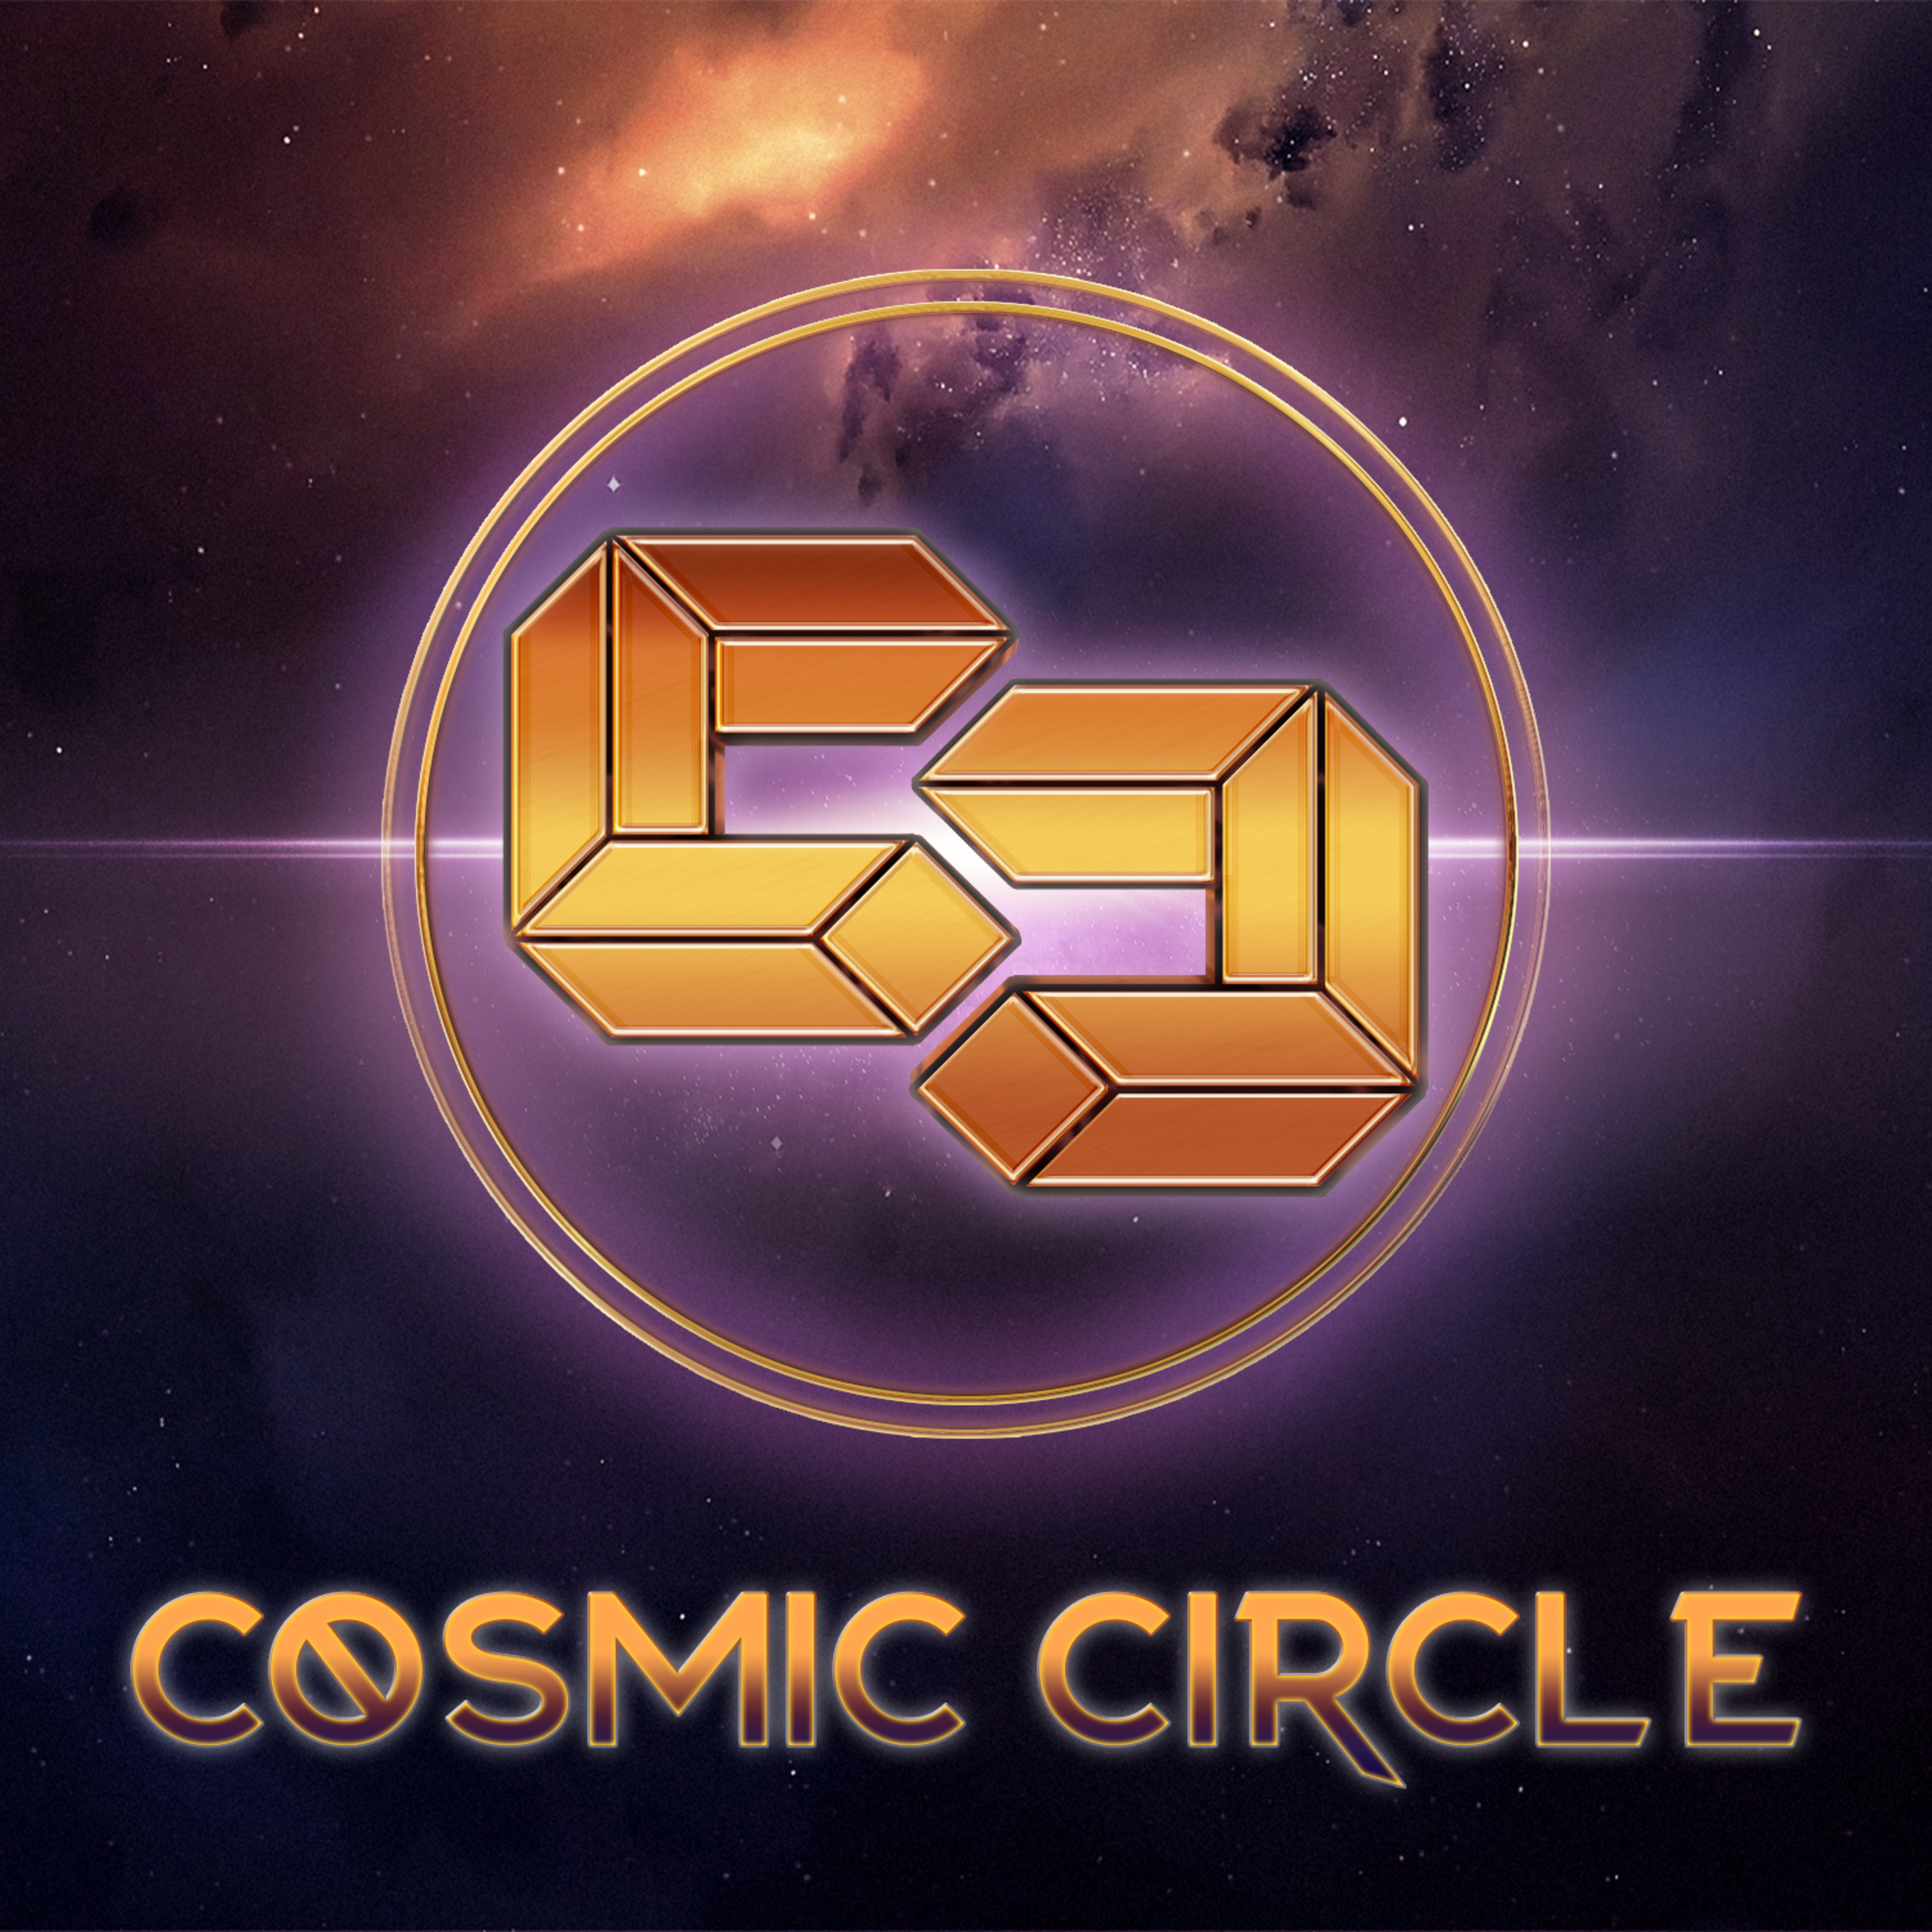 Cosmic Circle Ep. 18: New DC Slate Discussion - Chapter 1: Gods and Monsters